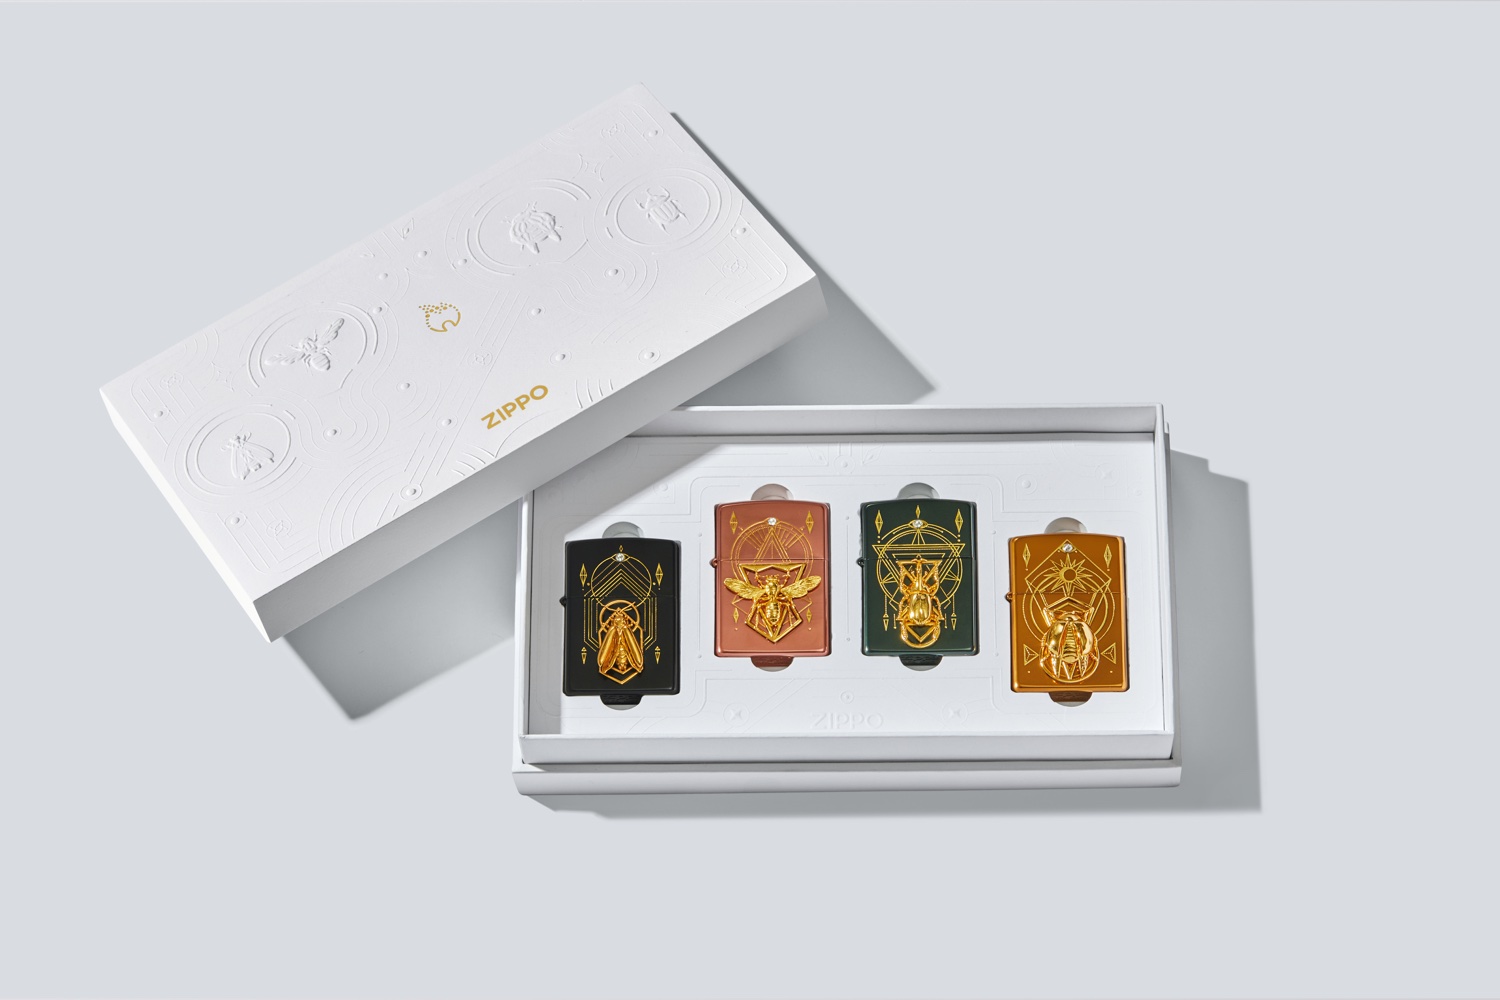 Zippo Lighters Brings Bugs to LIfe with Their New Limited Edition Packaging